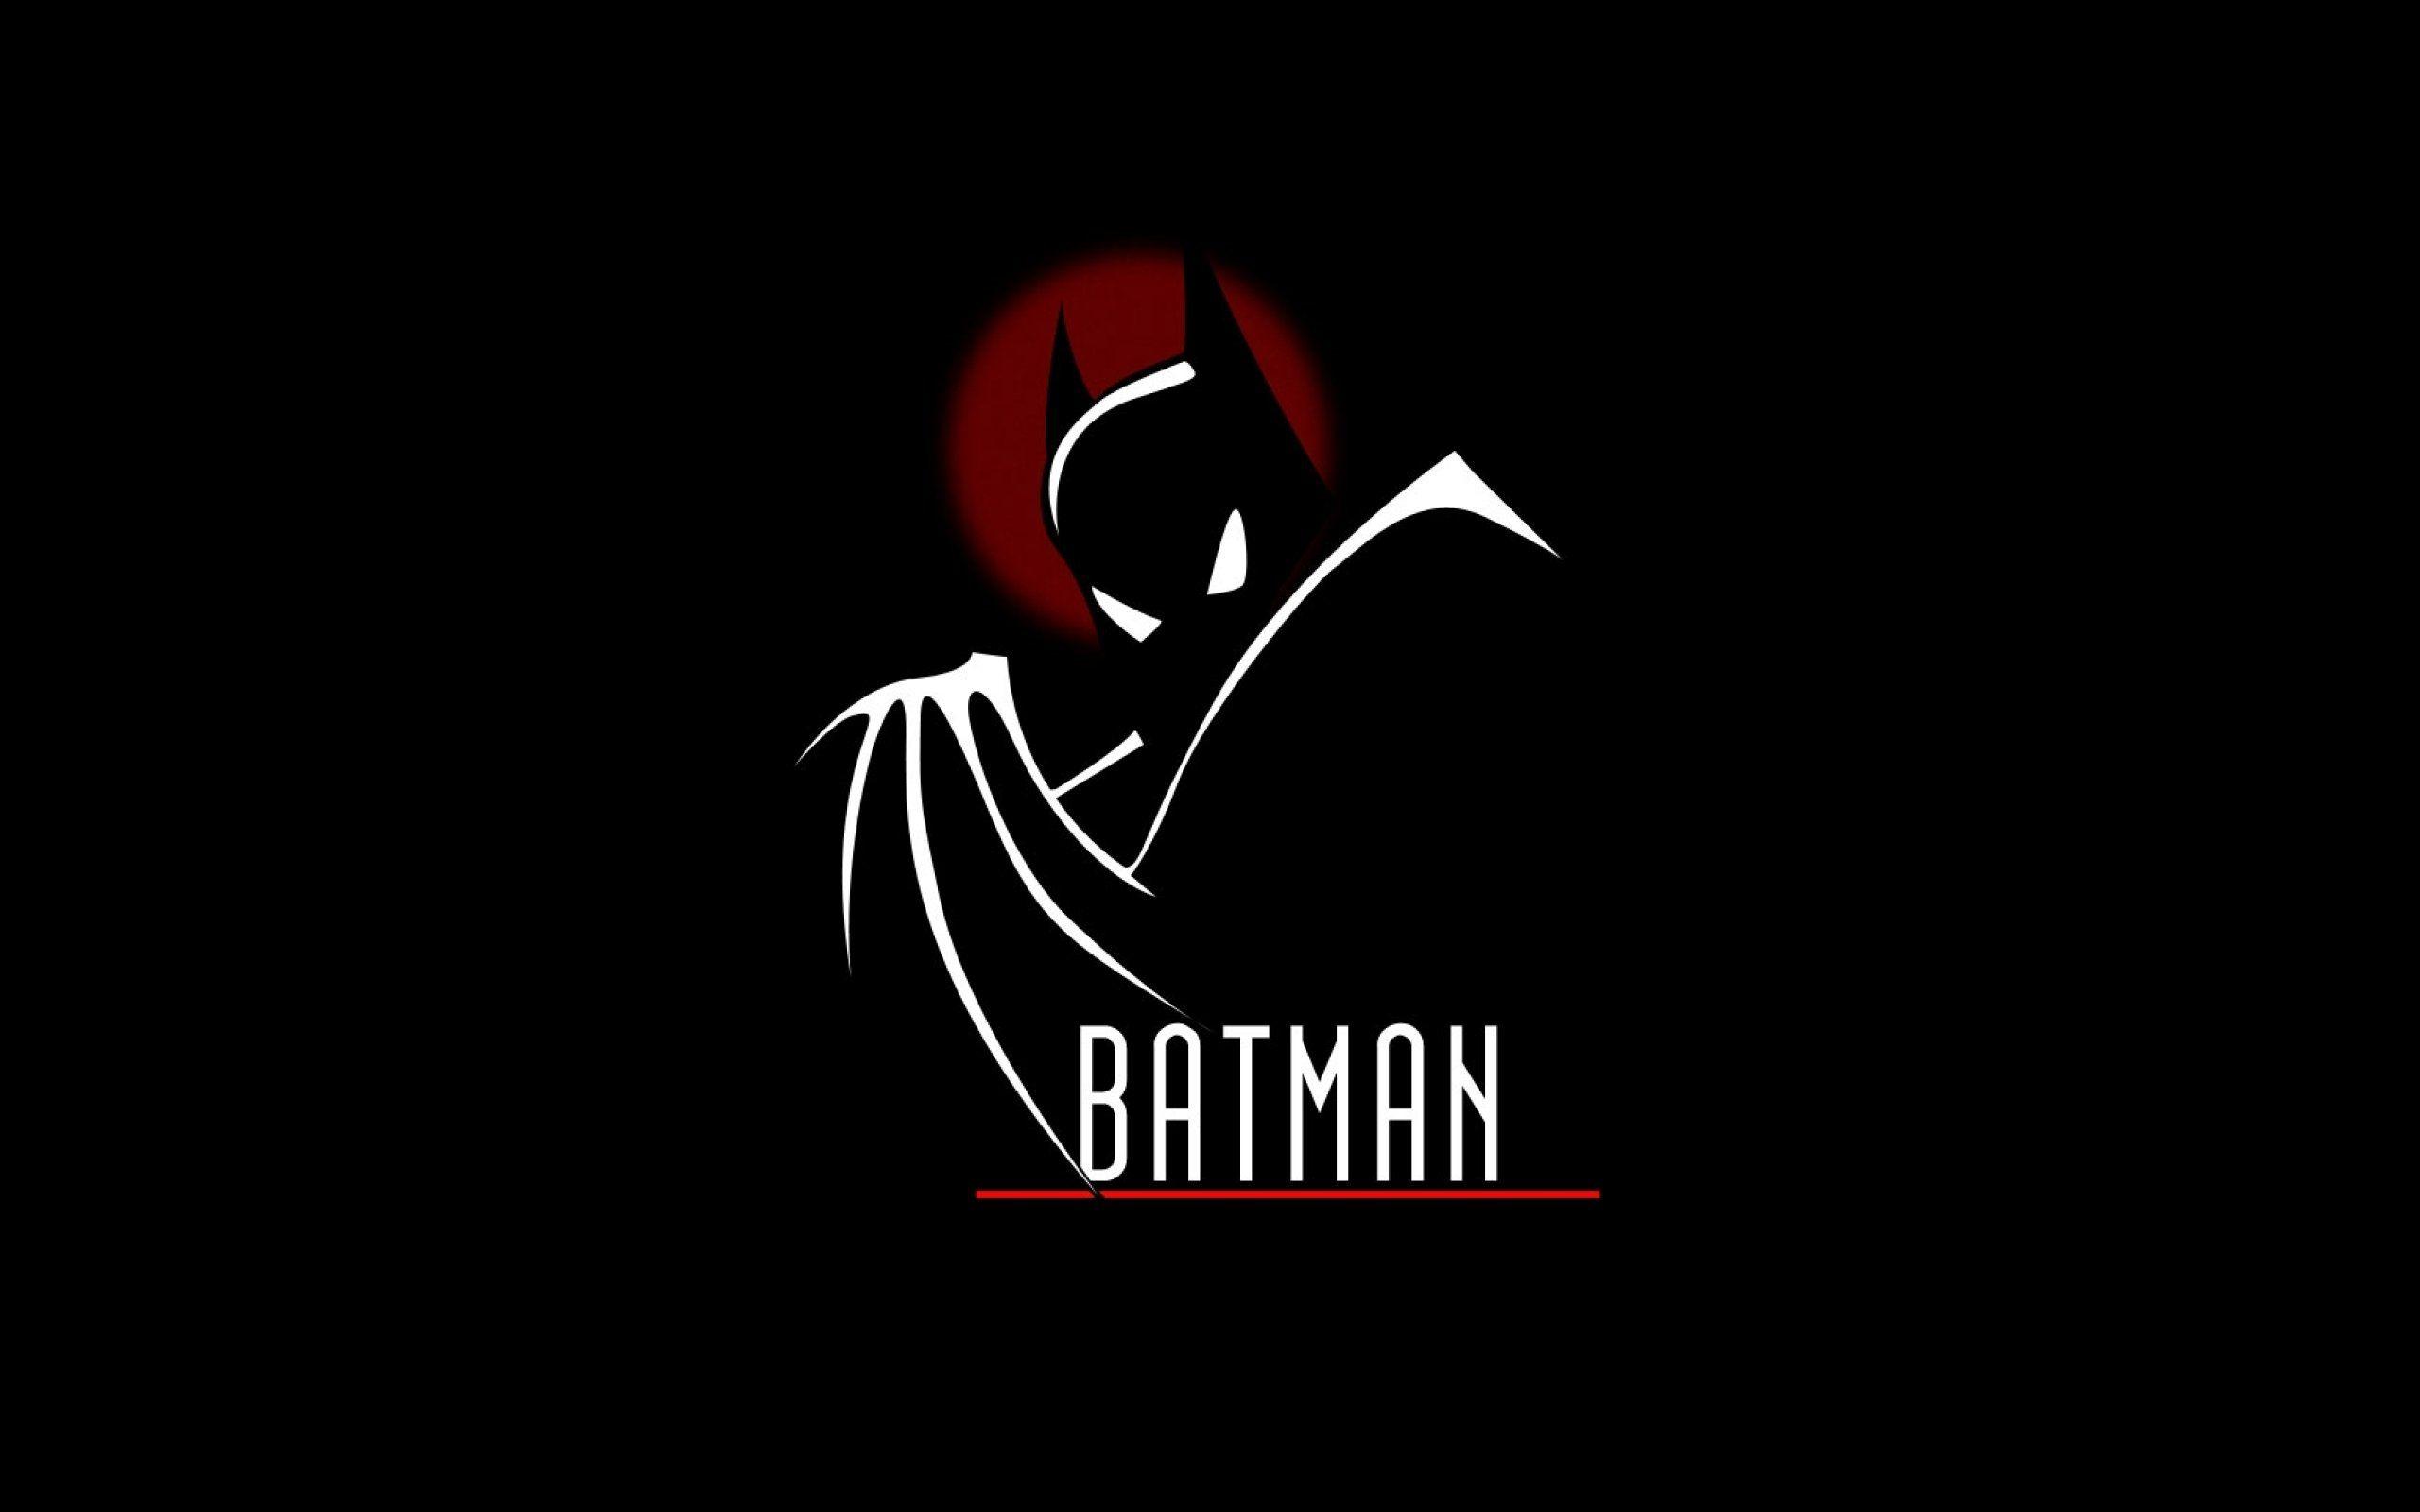 Batman Animated Wallpapers - Top Free Batman Animated Backgrounds ...